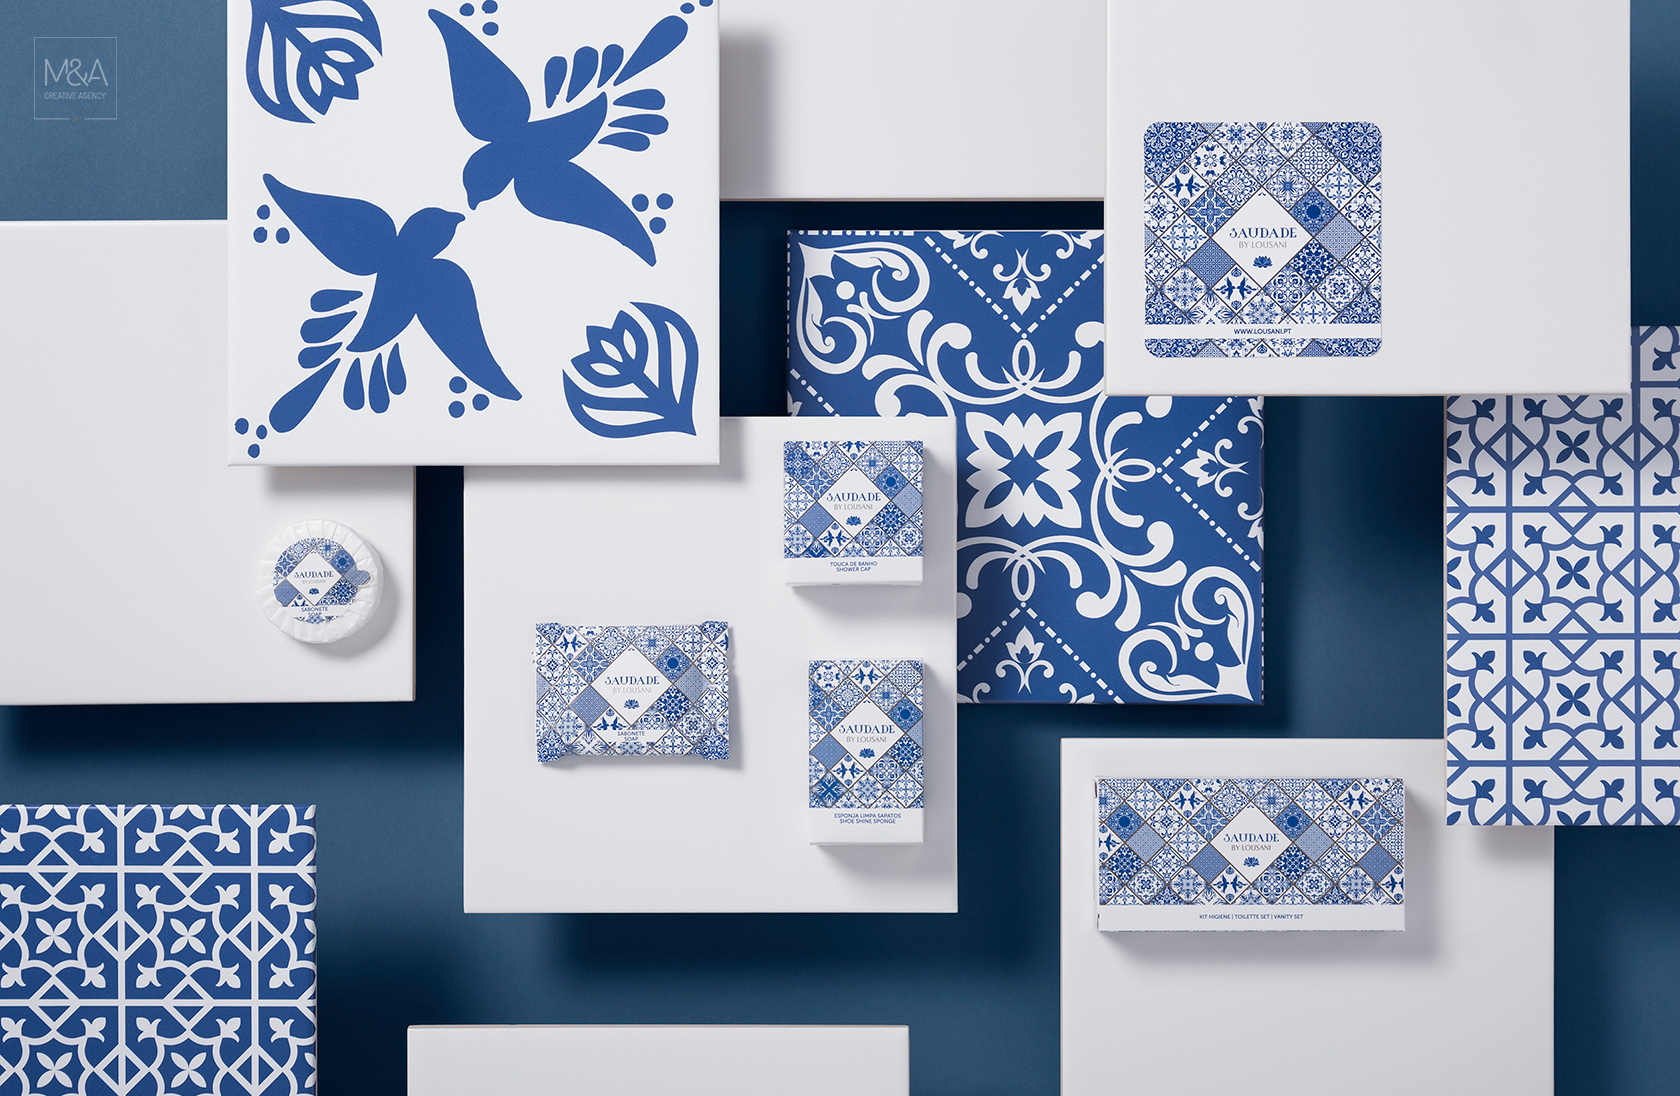 Portuguese tiles give life to the new collection of Luxury Amenities